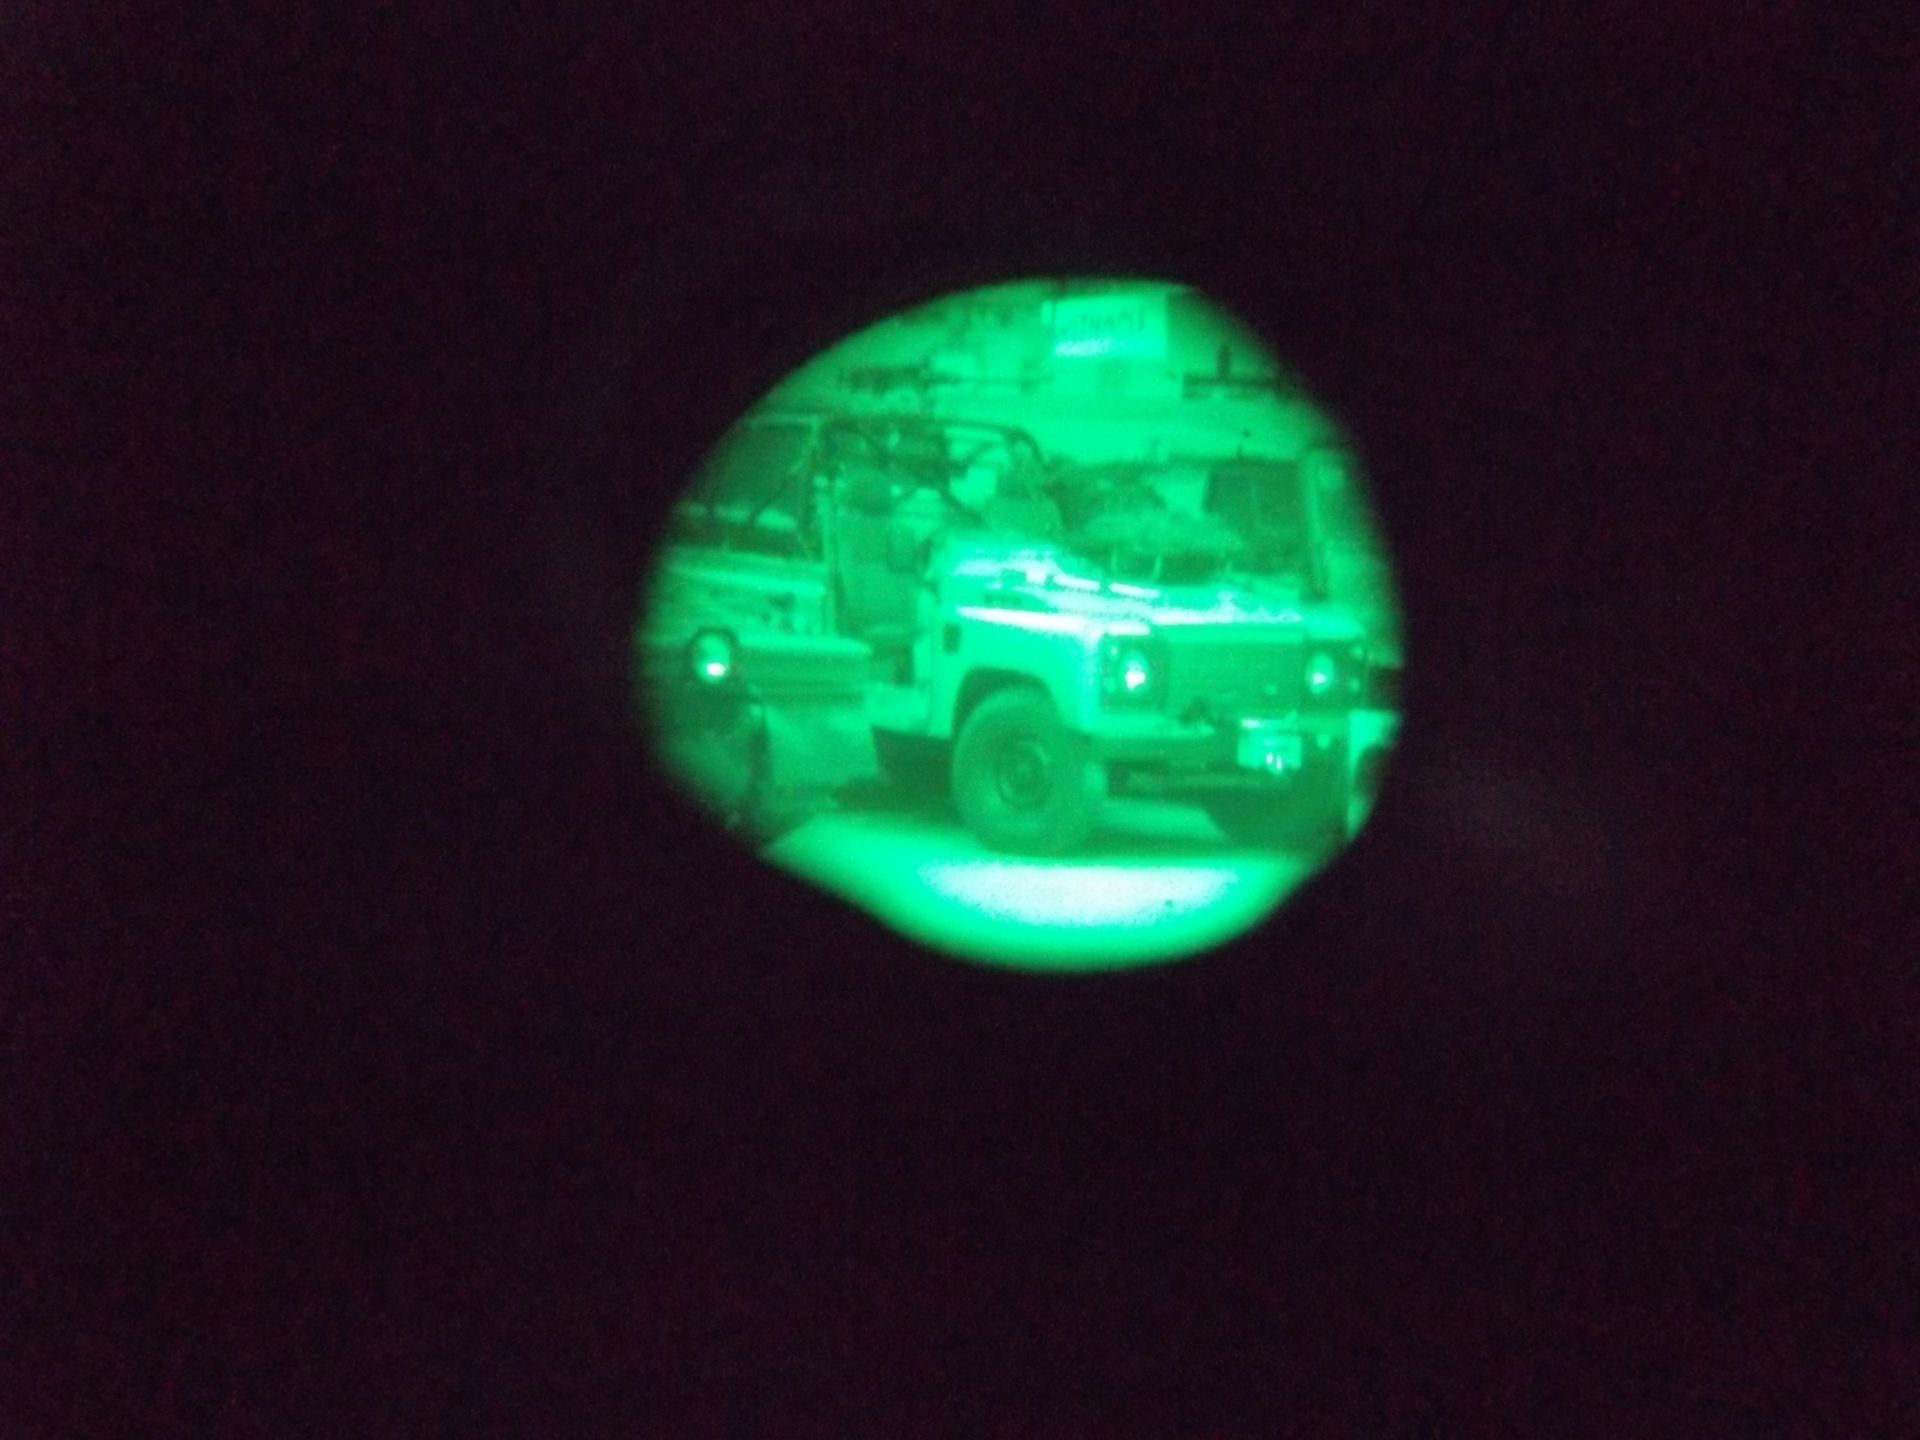 Telescope Straight Image Intensified L6A1 Scope - British Military Night Vision Pocket Scope - Image 8 of 9